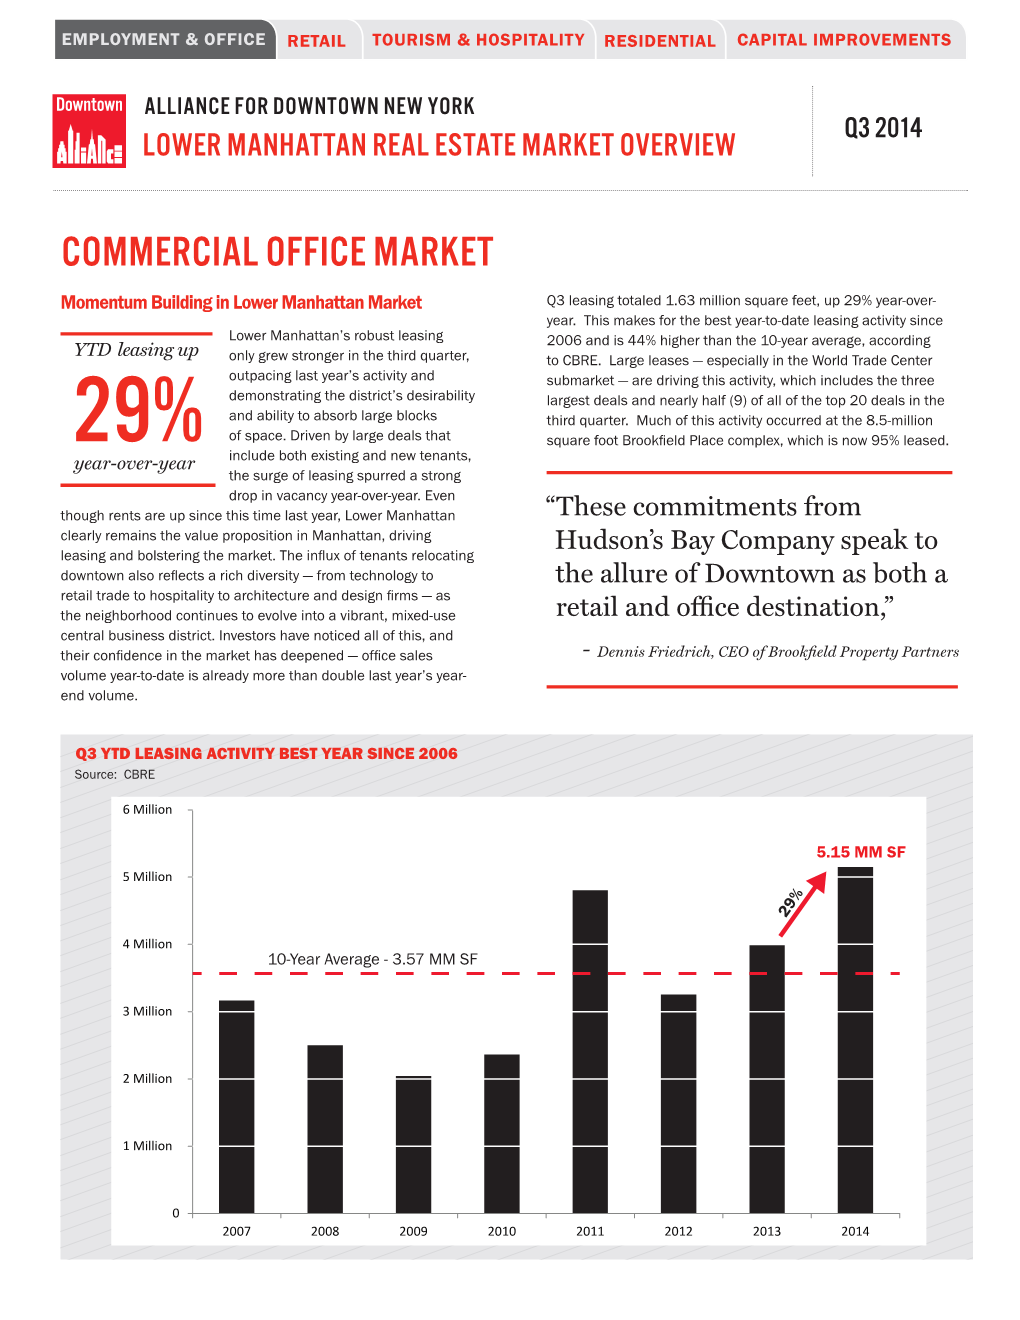 COMMERCIAL OFFICE MARKET Momentum Building in Lower Manhattan Market Q3 Leasing Totaled 1.63 Million Square Feet, up 29% Year-Over- Year